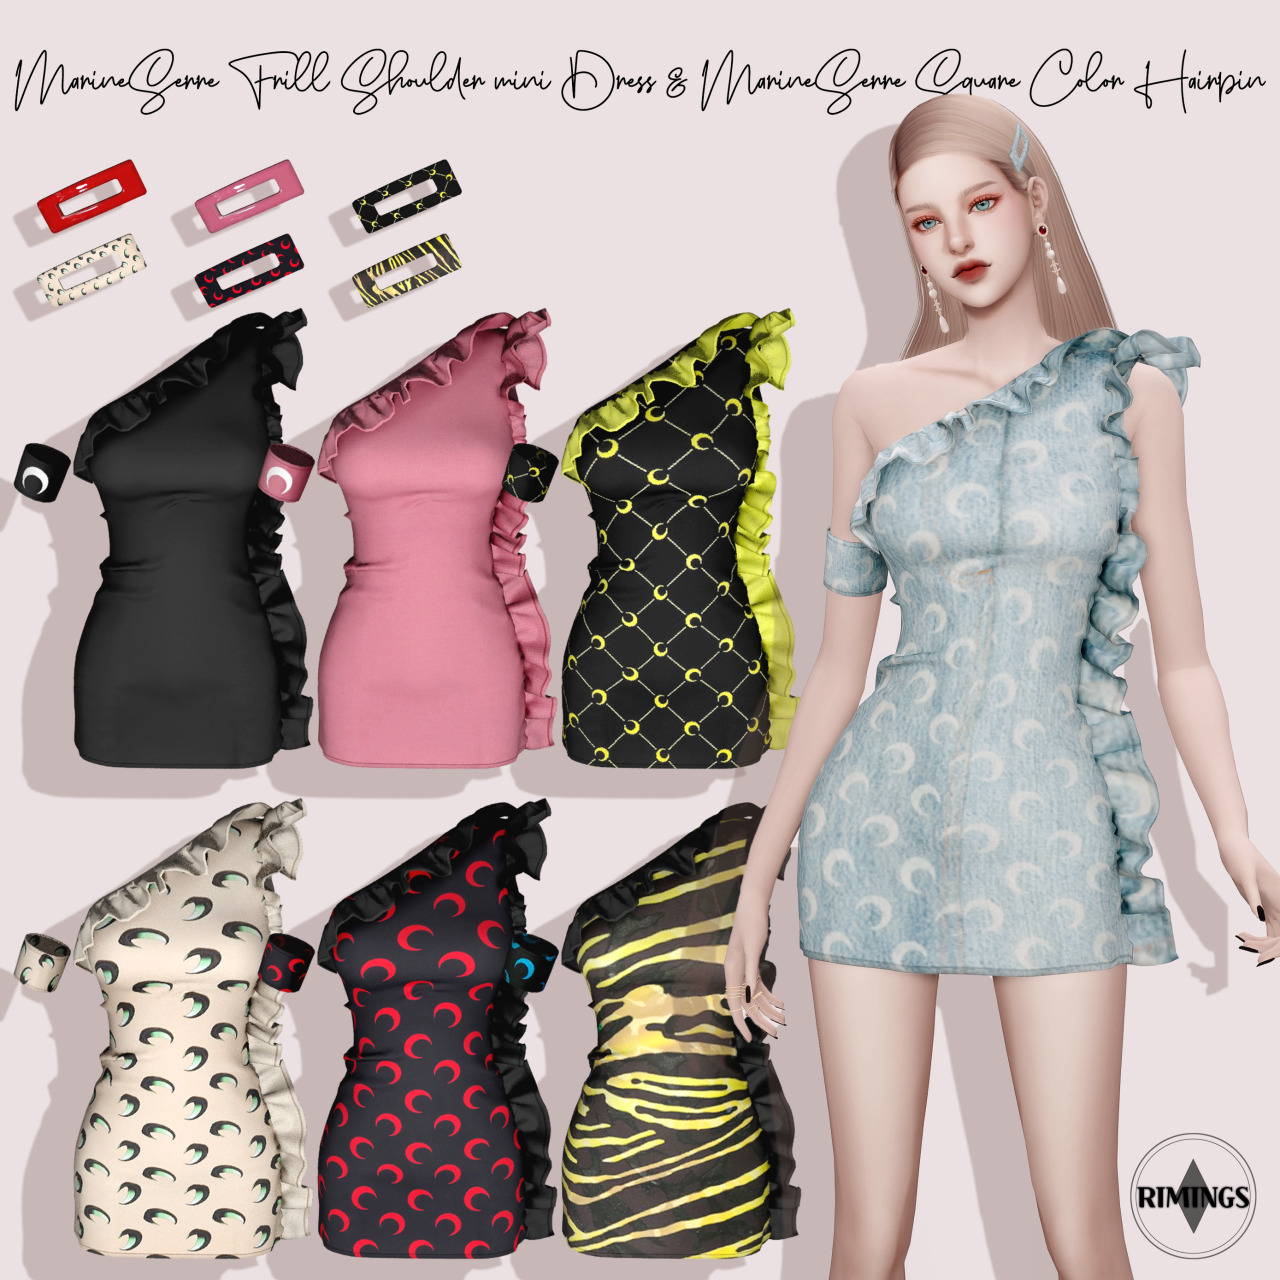 Marine Serre Frill Shoulder mini Dress and Square Color Hairpin from ...